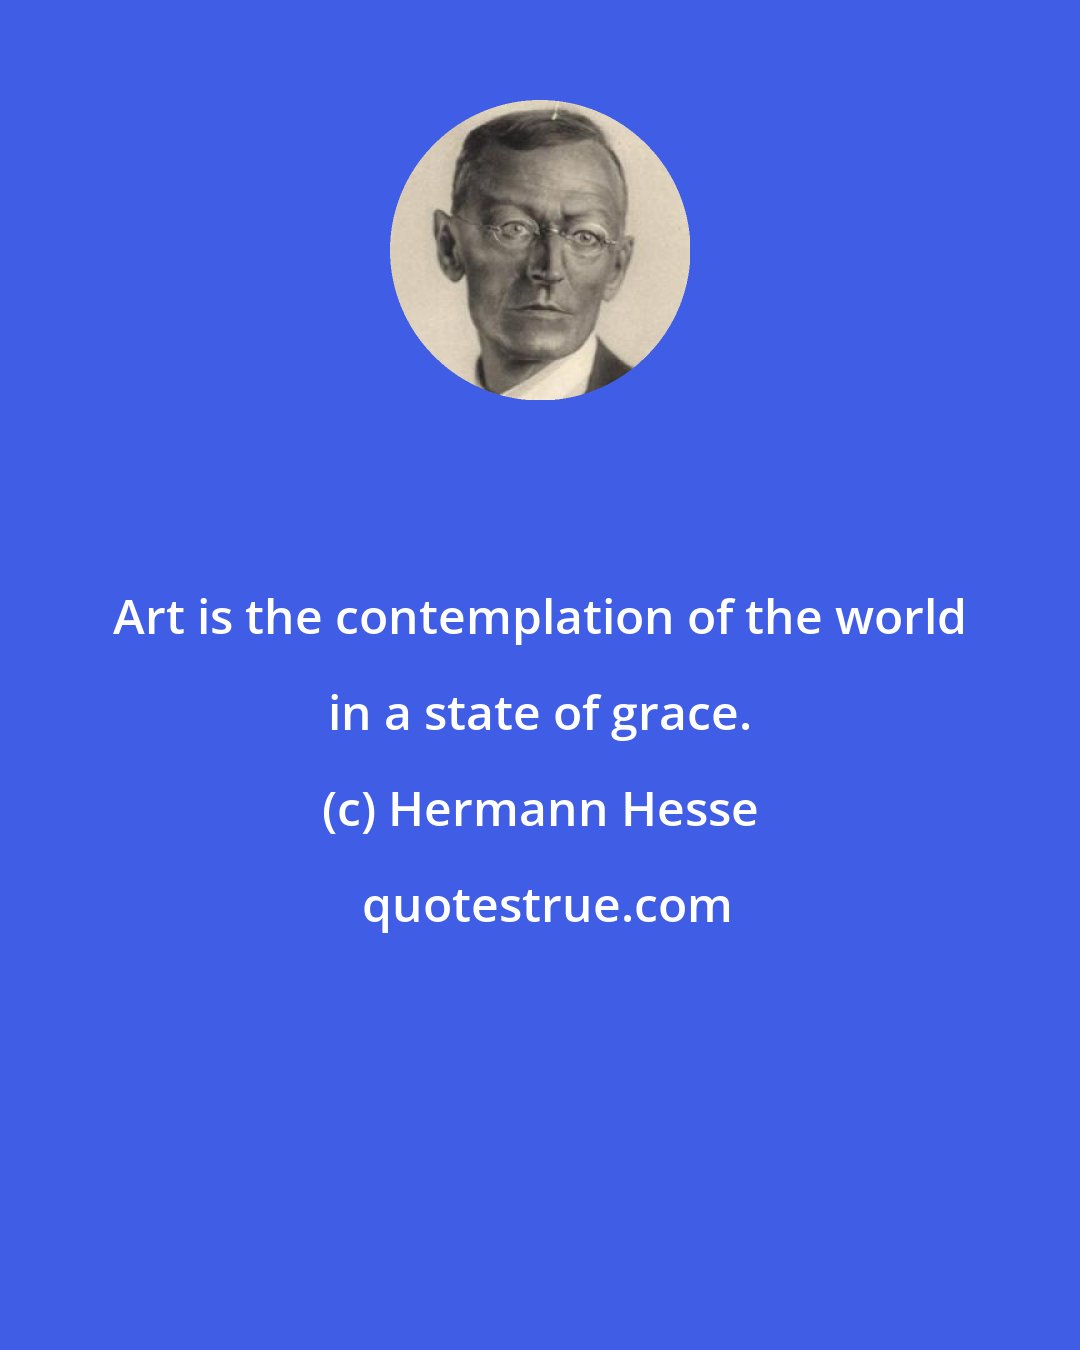 Hermann Hesse: Art is the contemplation of the world in a state of grace.